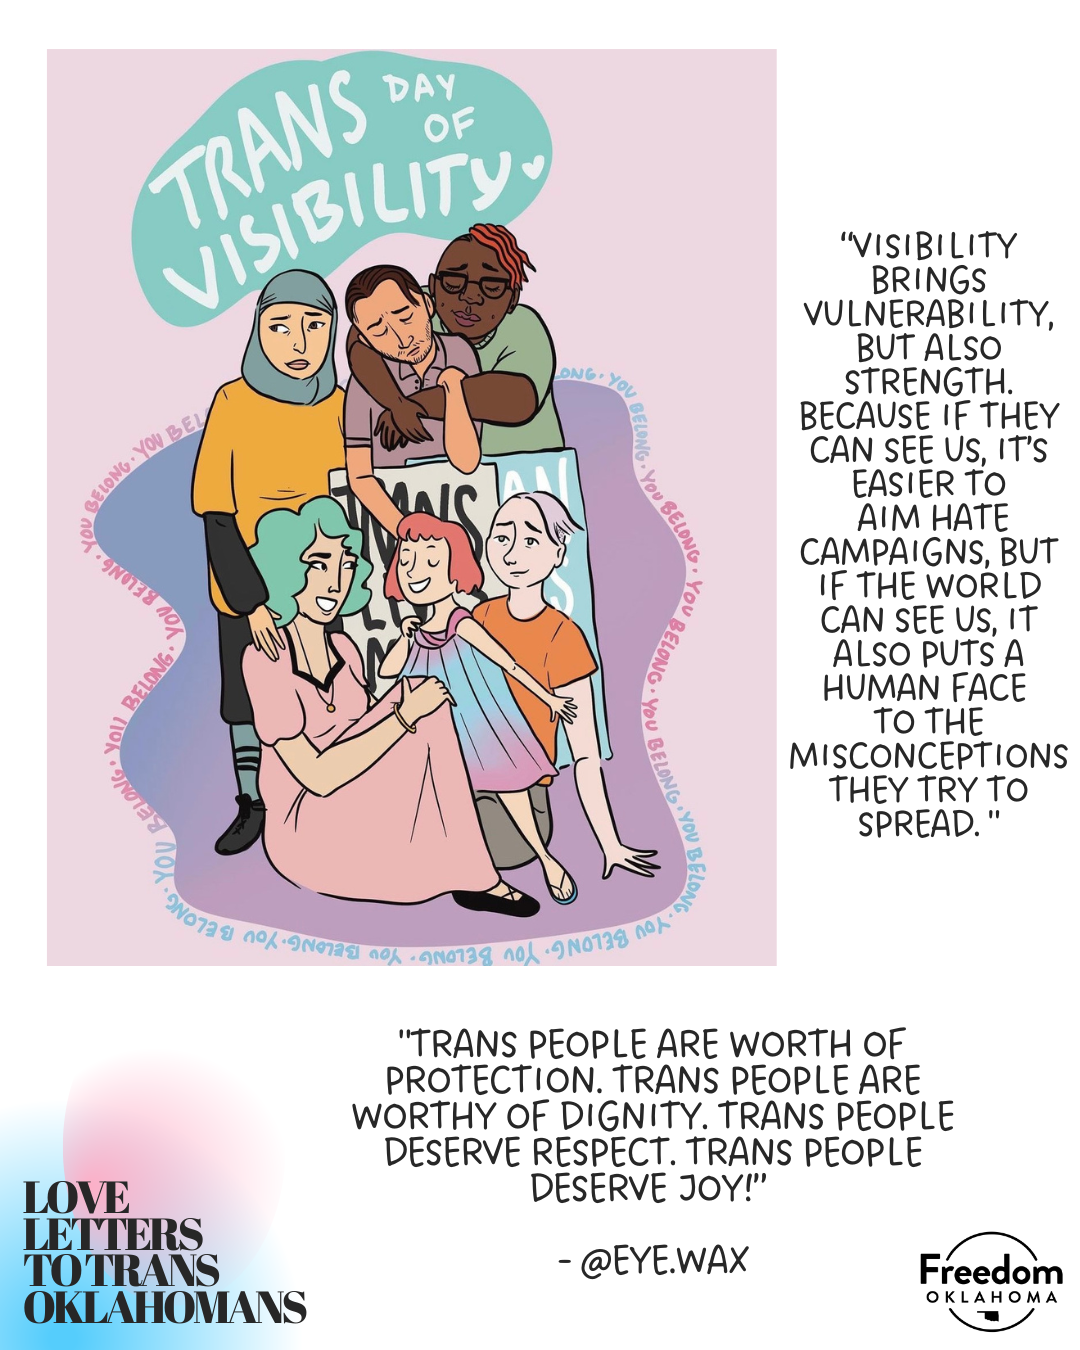  White background with "Love Letters to Trans Oklahomans" in the bottom left. Most of the image is text and an art submission: “Visibility brings vulnerability, but also strength. Because if they can see us, it’s easier to aim hate campaigns, but if 